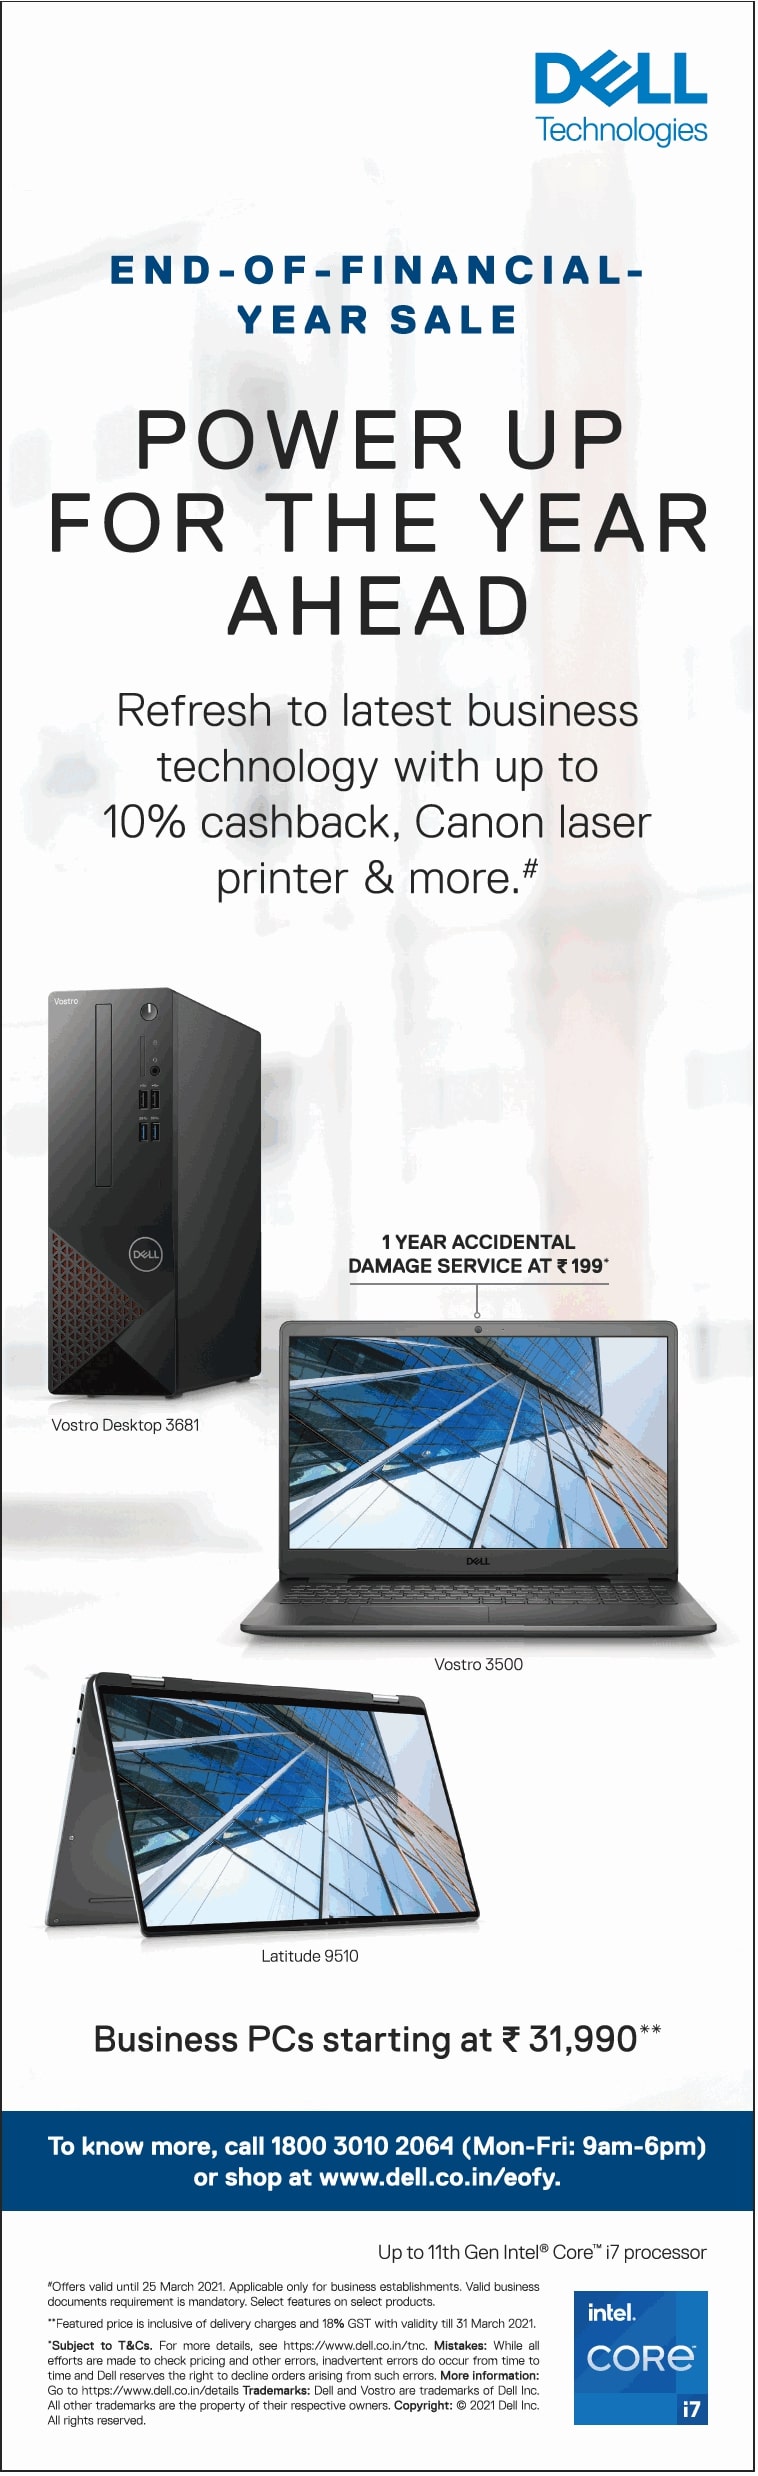 dell-technologies-power-up-for-the-year-ahead-ad-times-of-india-mumbai-10-03-2021